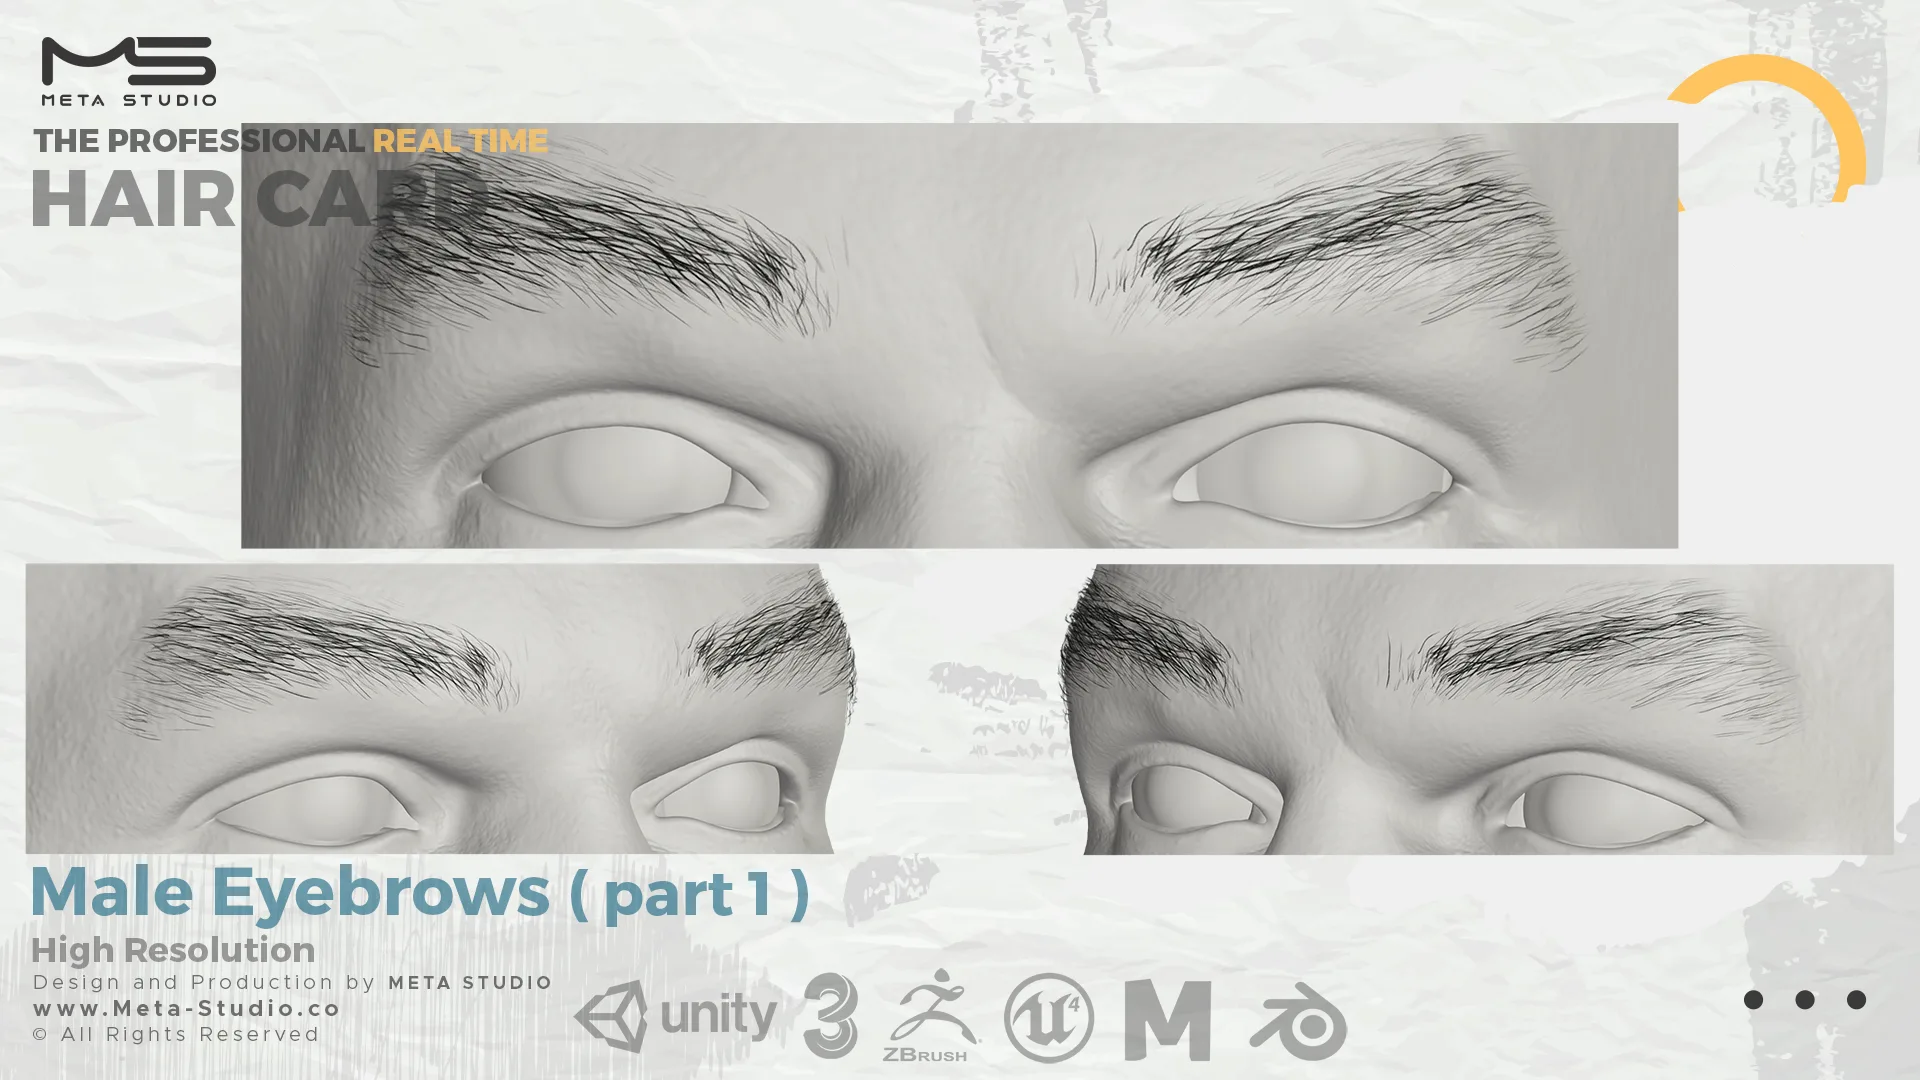 60 Men's and Women's Eyebrows (Bundle) Realtime Hair cards - 50% OFF